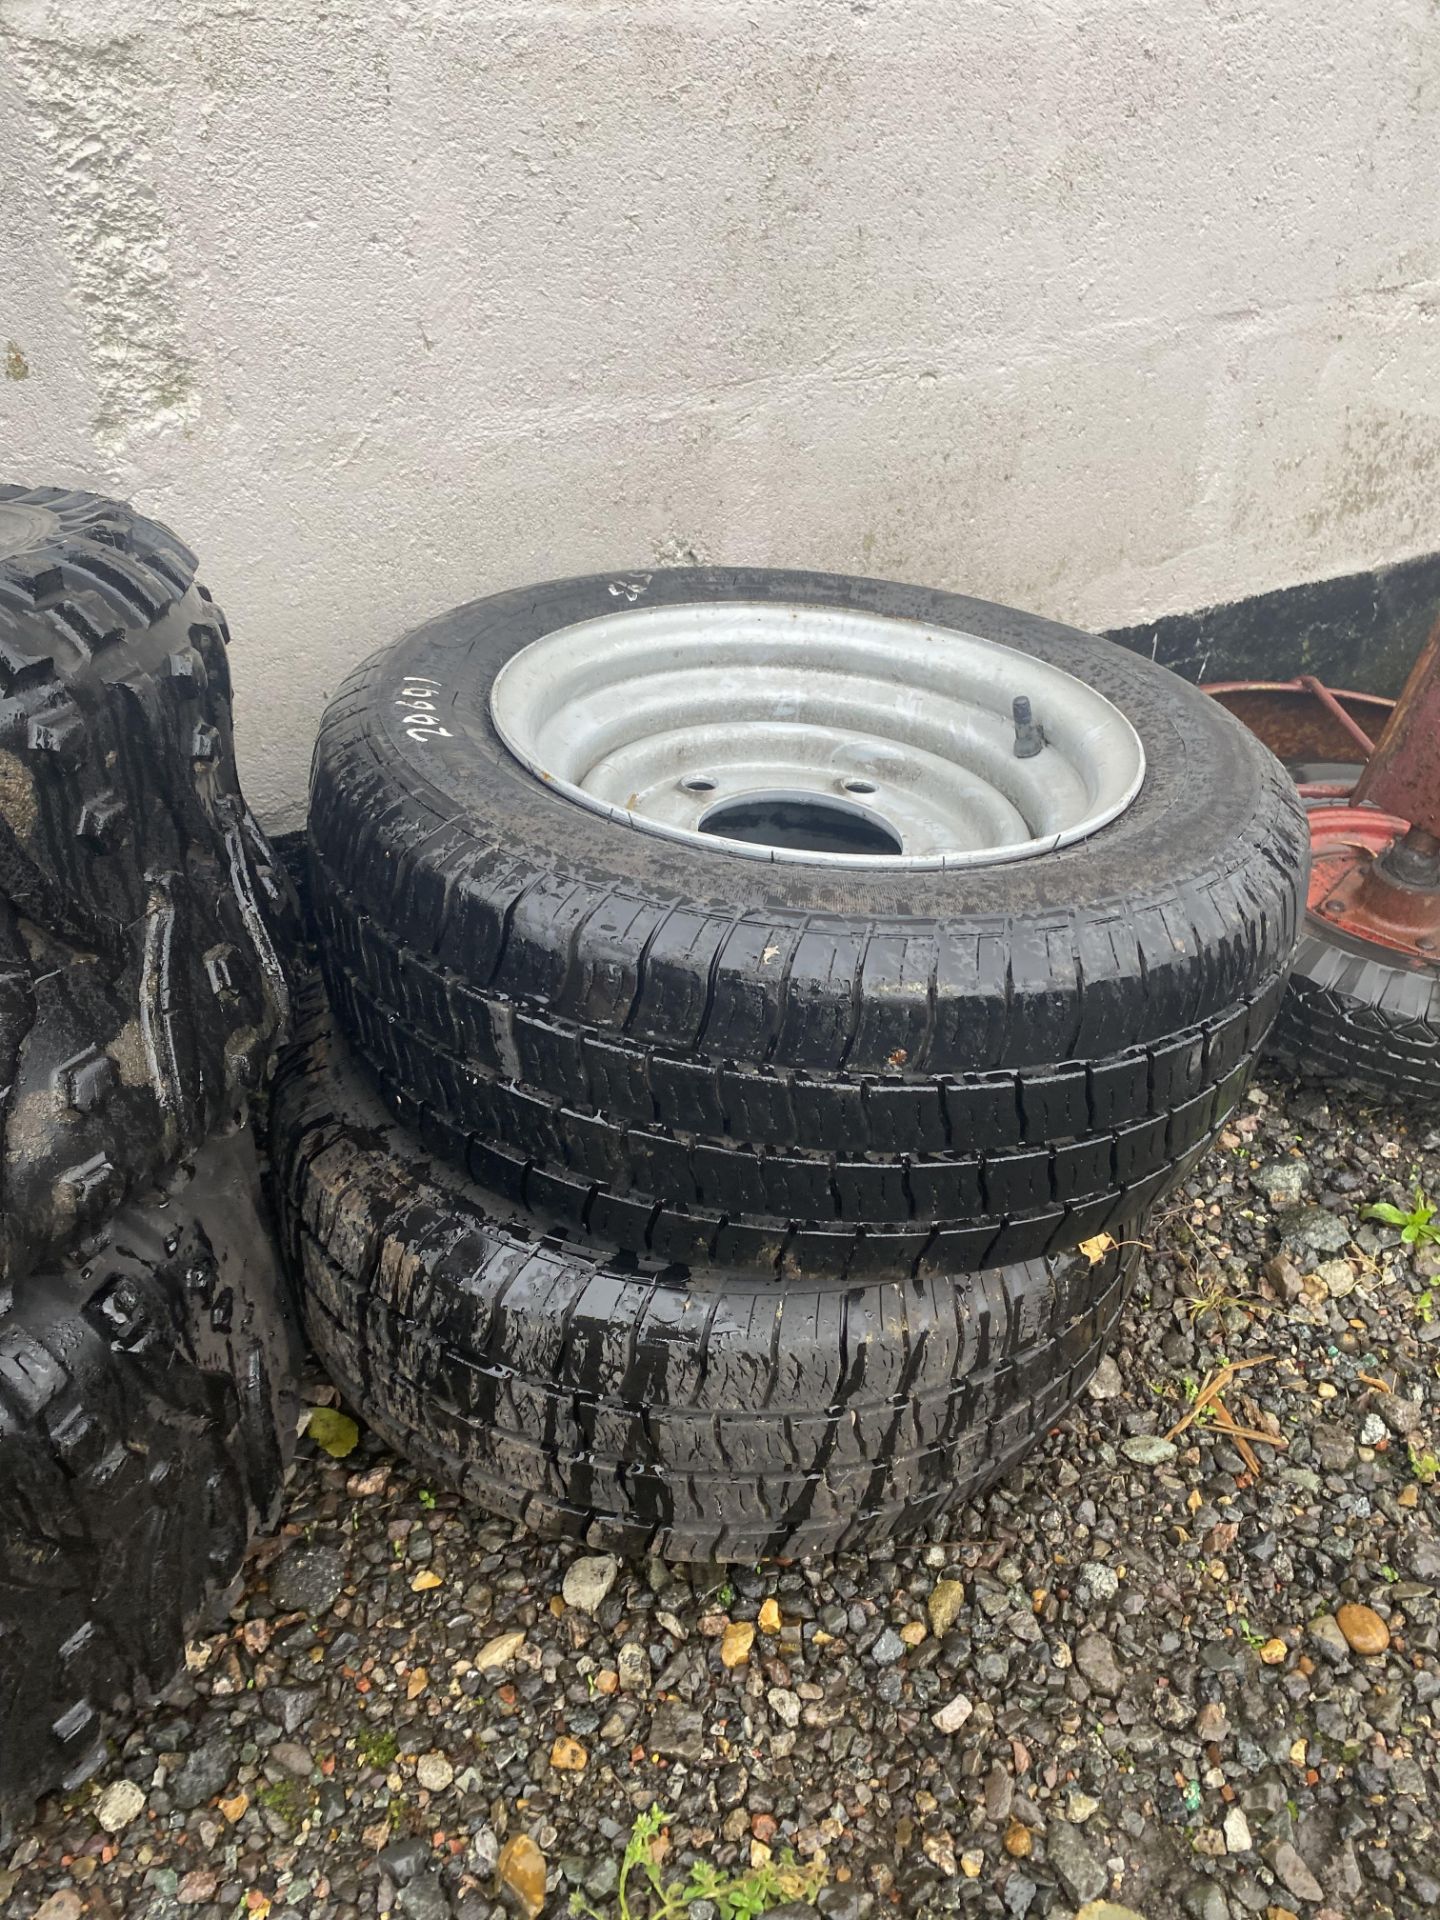 2x Ifor Williams trailer wheels and tyres. V